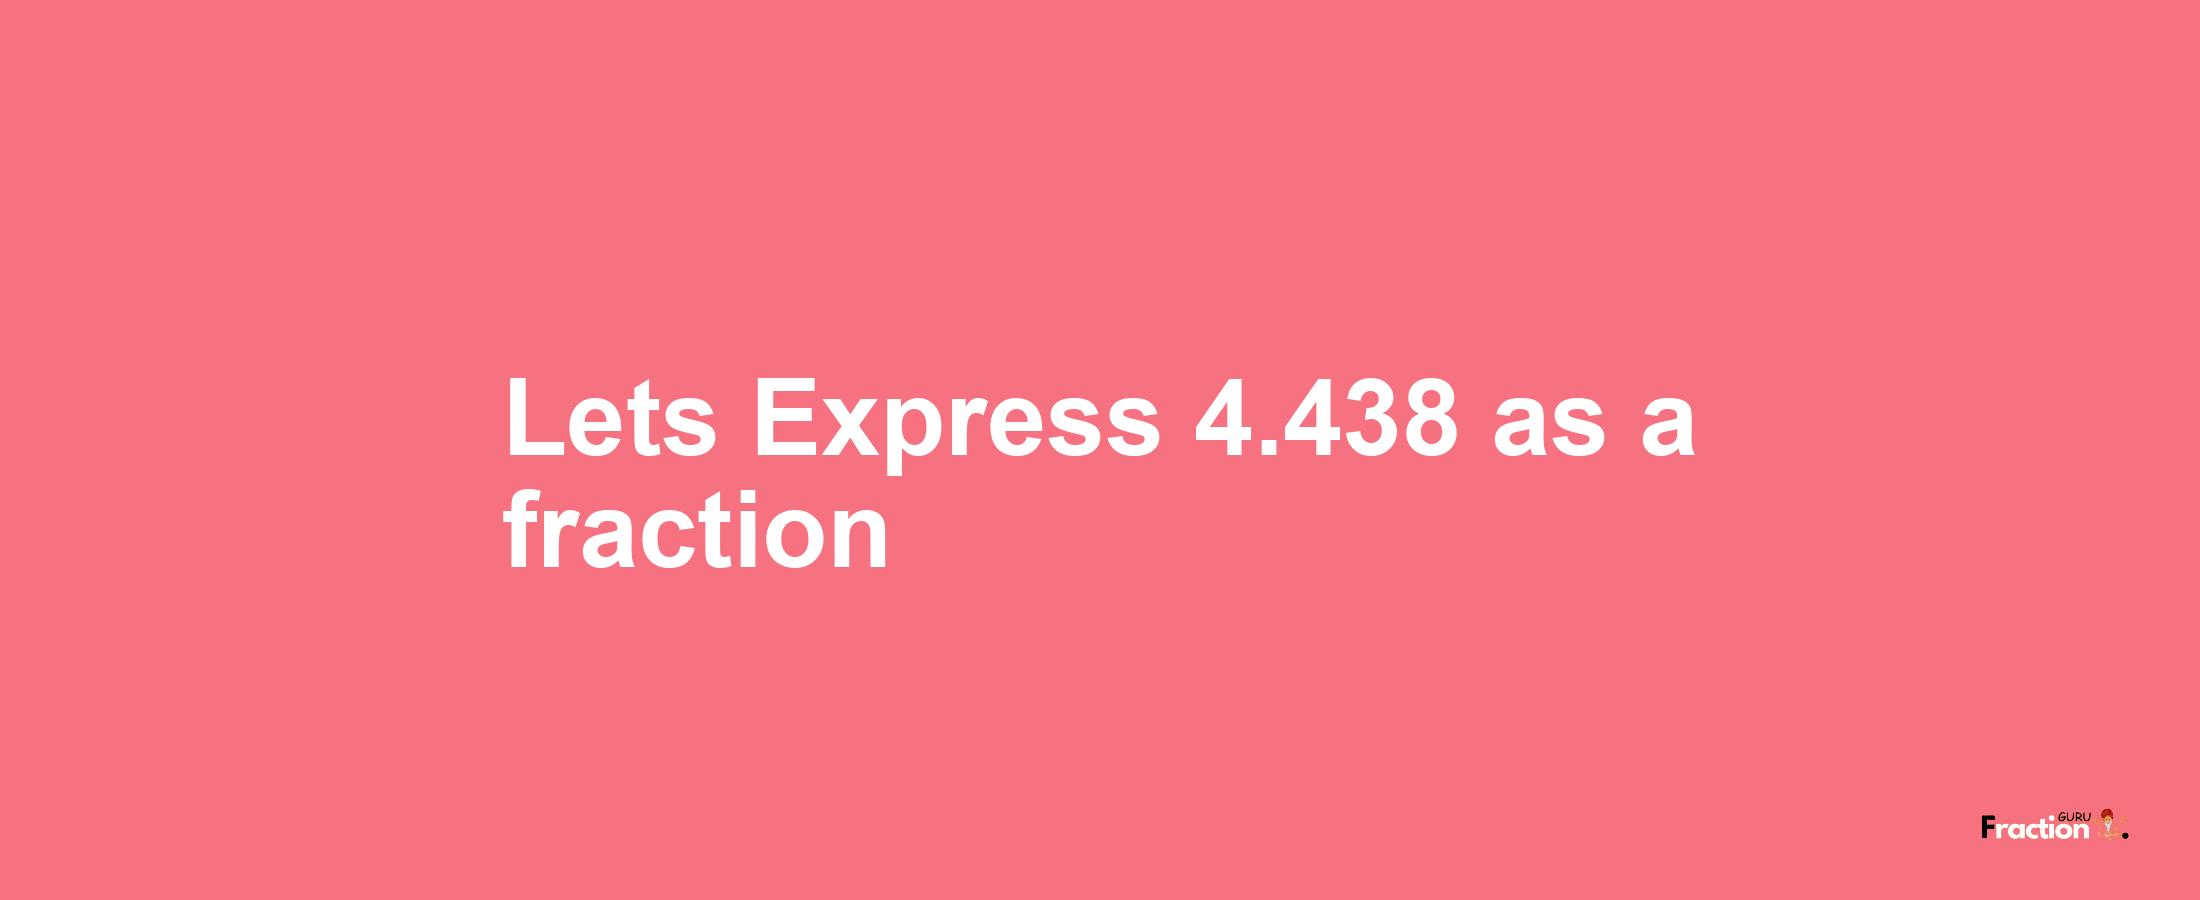 Lets Express 4.438 as afraction